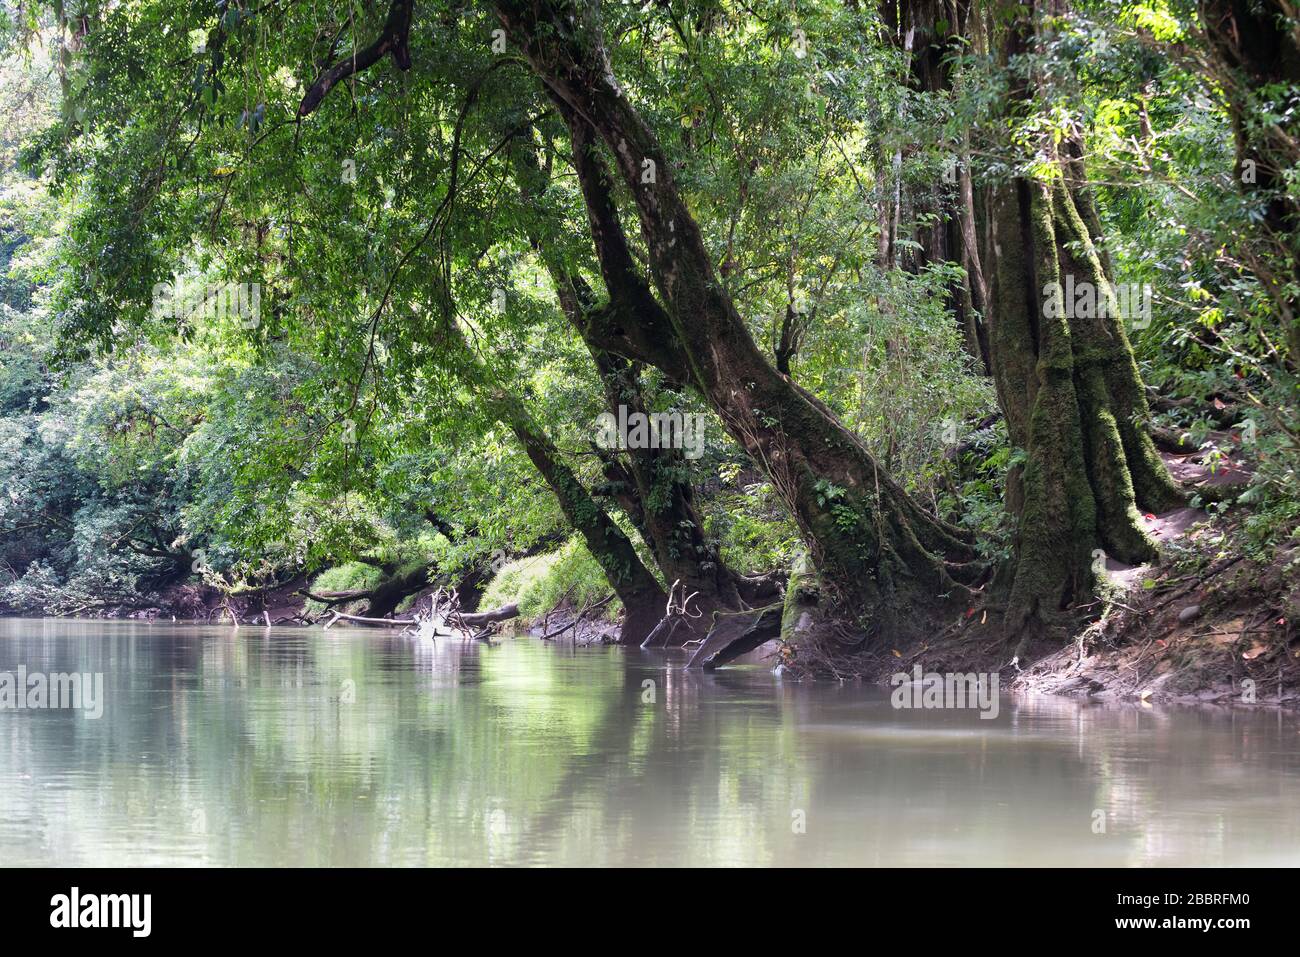 Dreamy landscape of a tropical river surrounded by a lush forest. Rio Sarapiqui, Costa Rica. Stock Photo